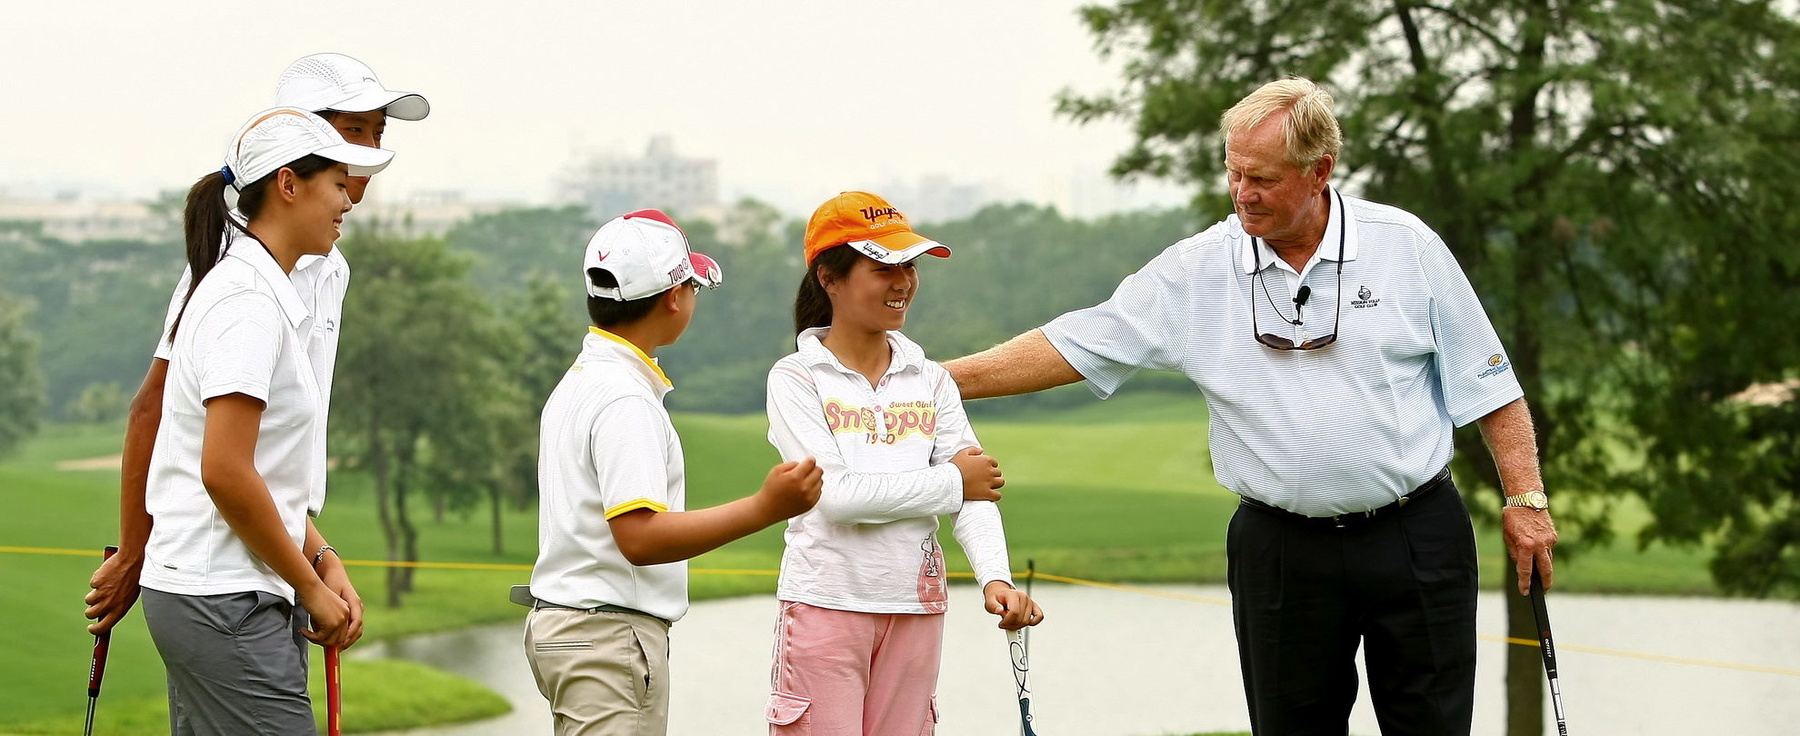 Jack Nicklaus Interaction with Juniors